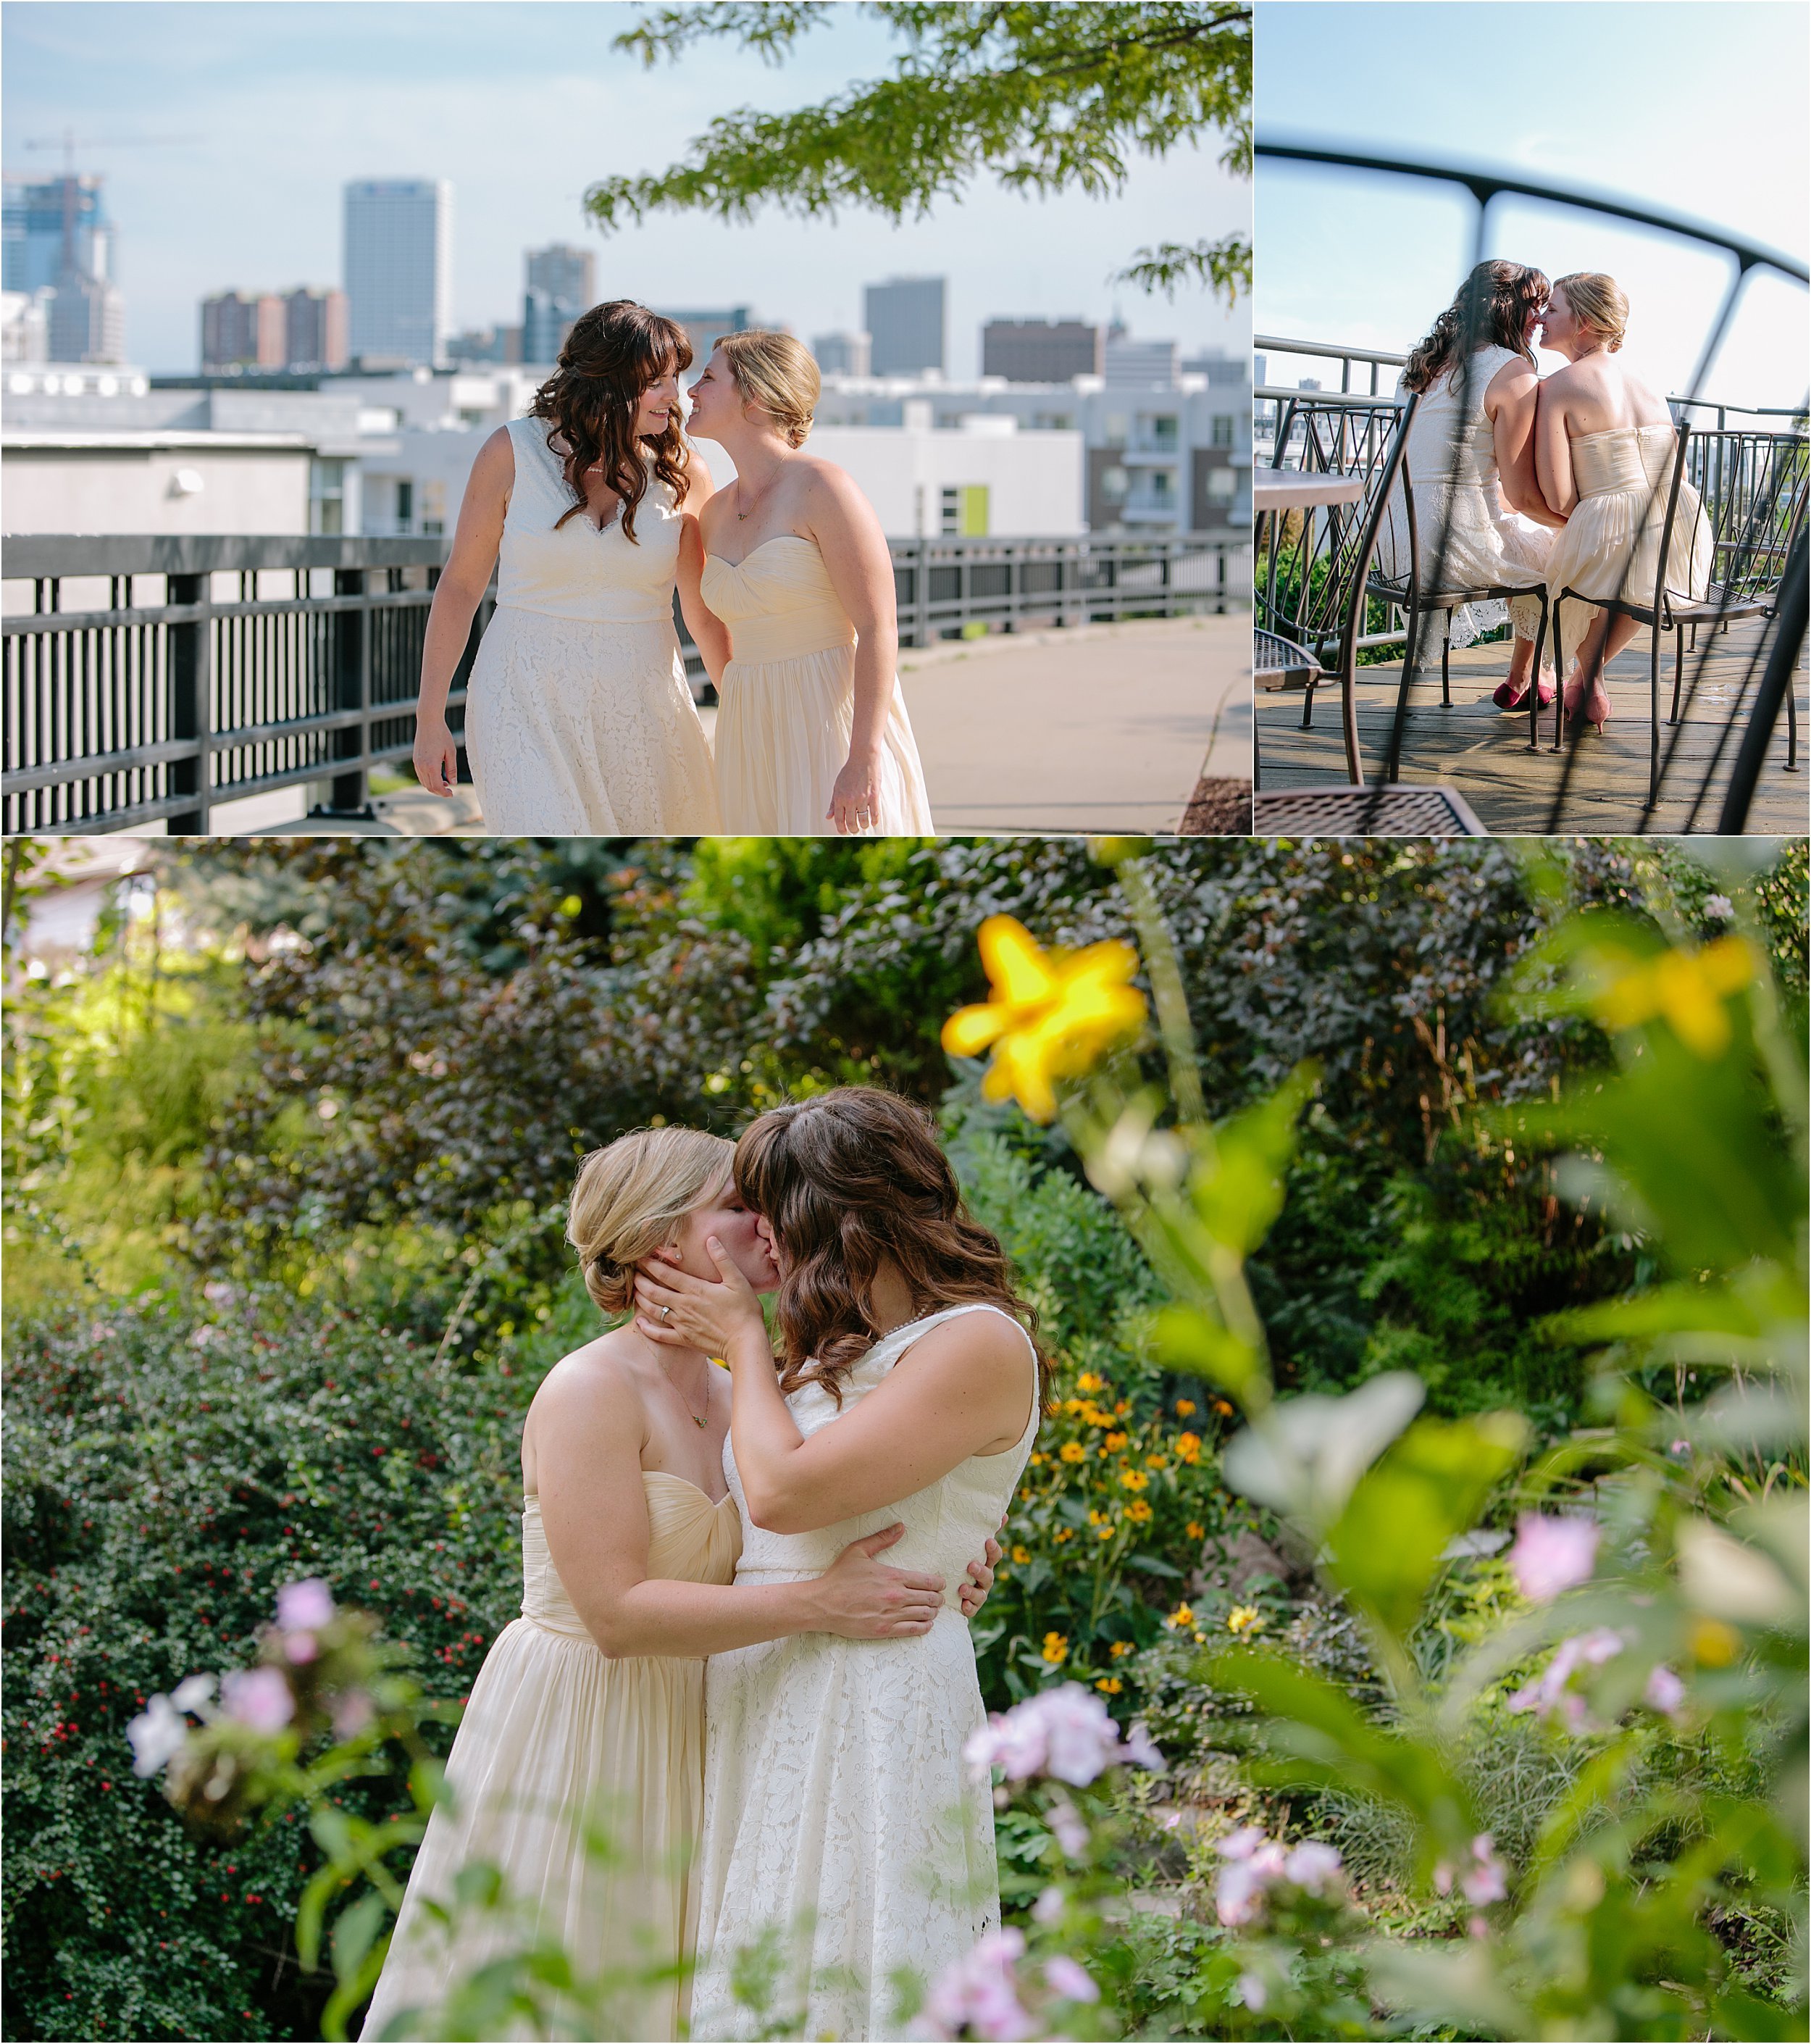 22-two-brides-outdoor-intimate-lgbtq.JPG